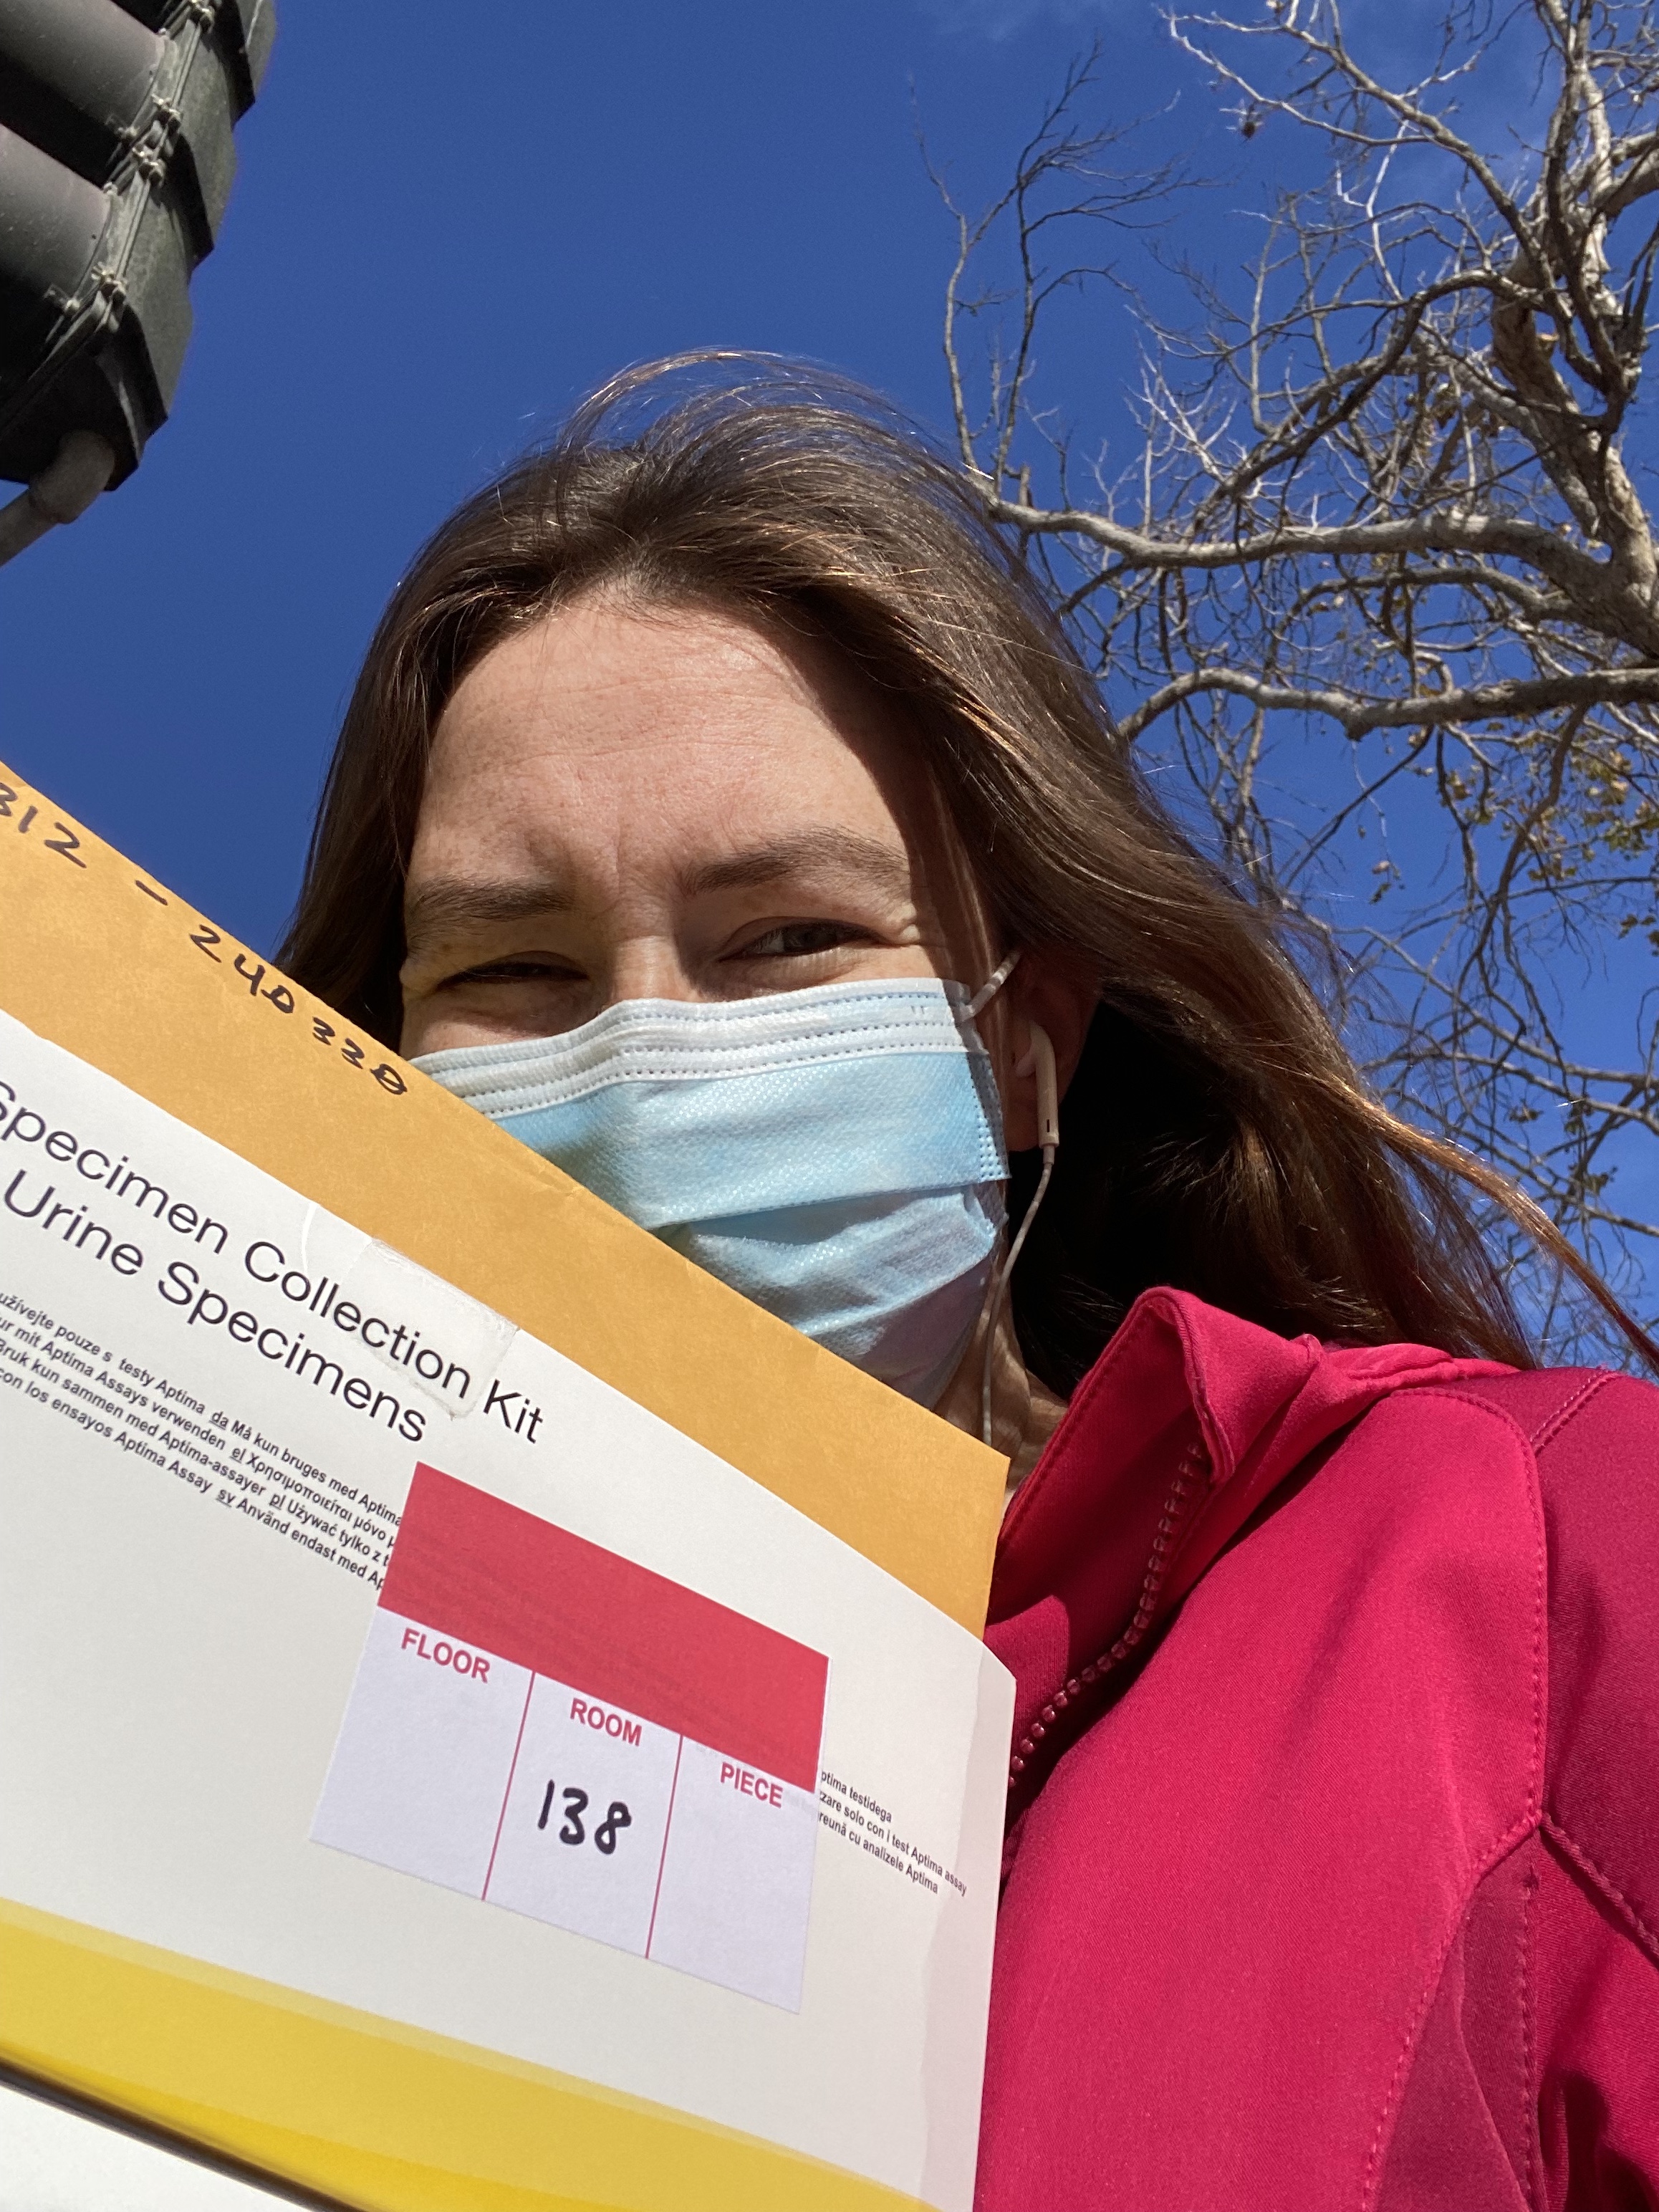 Catherine is seen taking a selfie during service. She is wearing a pink hoodie and a blue medical facemask. She is holding a box labeled "Specimen Collection Kit - Urine Specimens."